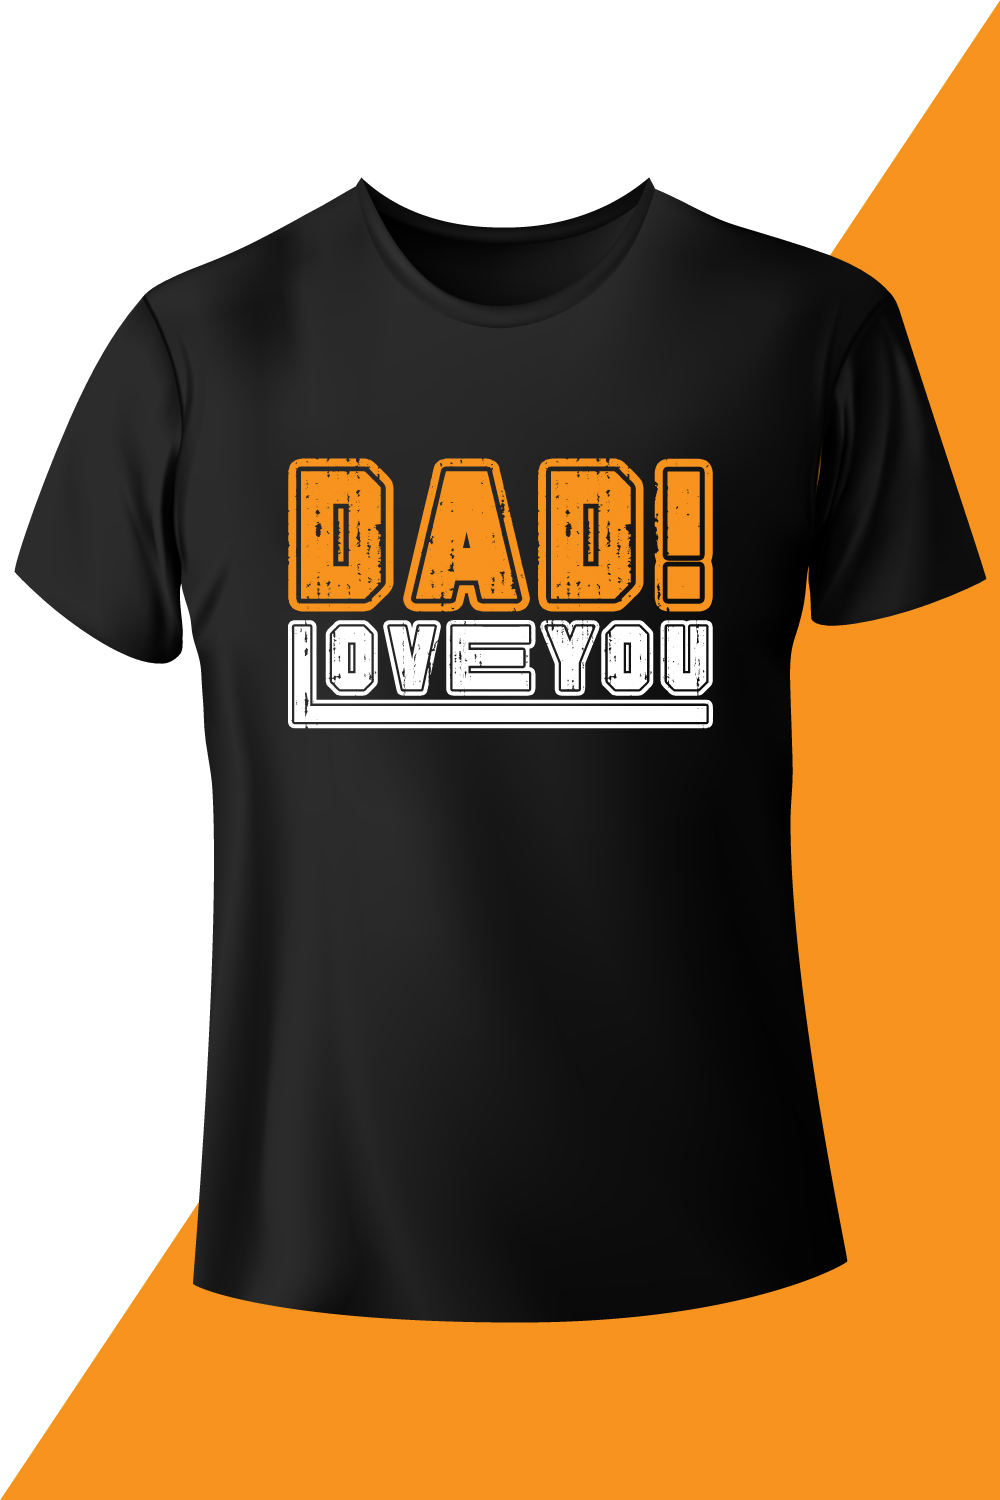 Image with a black t-shirt with a beautiful inscription Dad i love you.